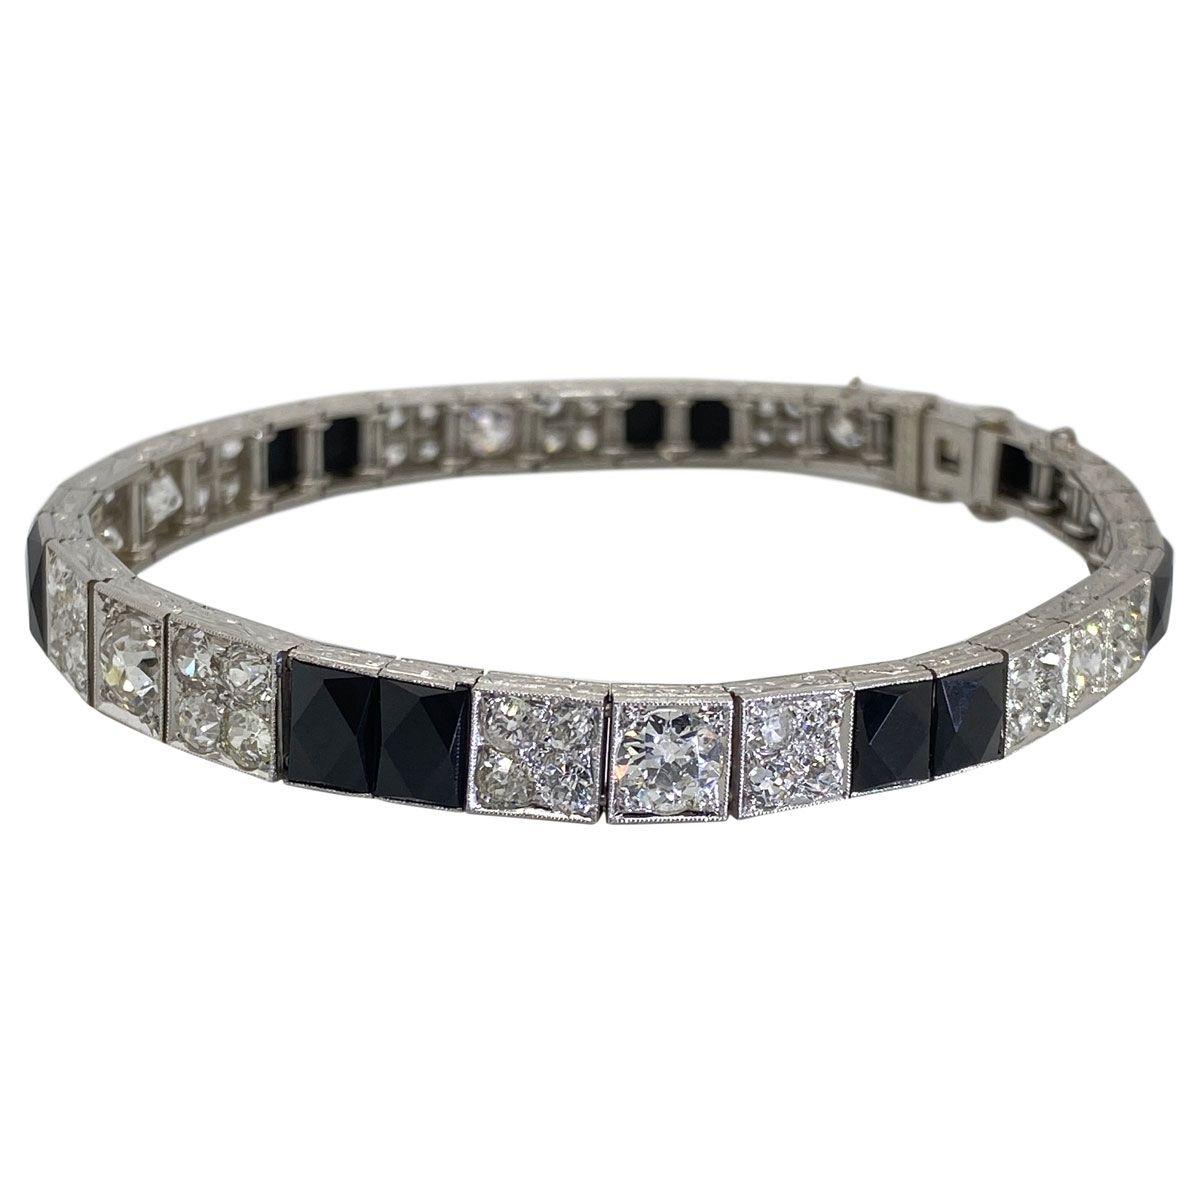 What's not to love about this sensational Art Deco diamond & onyx line bracelet? This style from the 1920's is just as fashionable today as it was back then, in fact probably more so. There is such an appreciation for jewels from this era that they